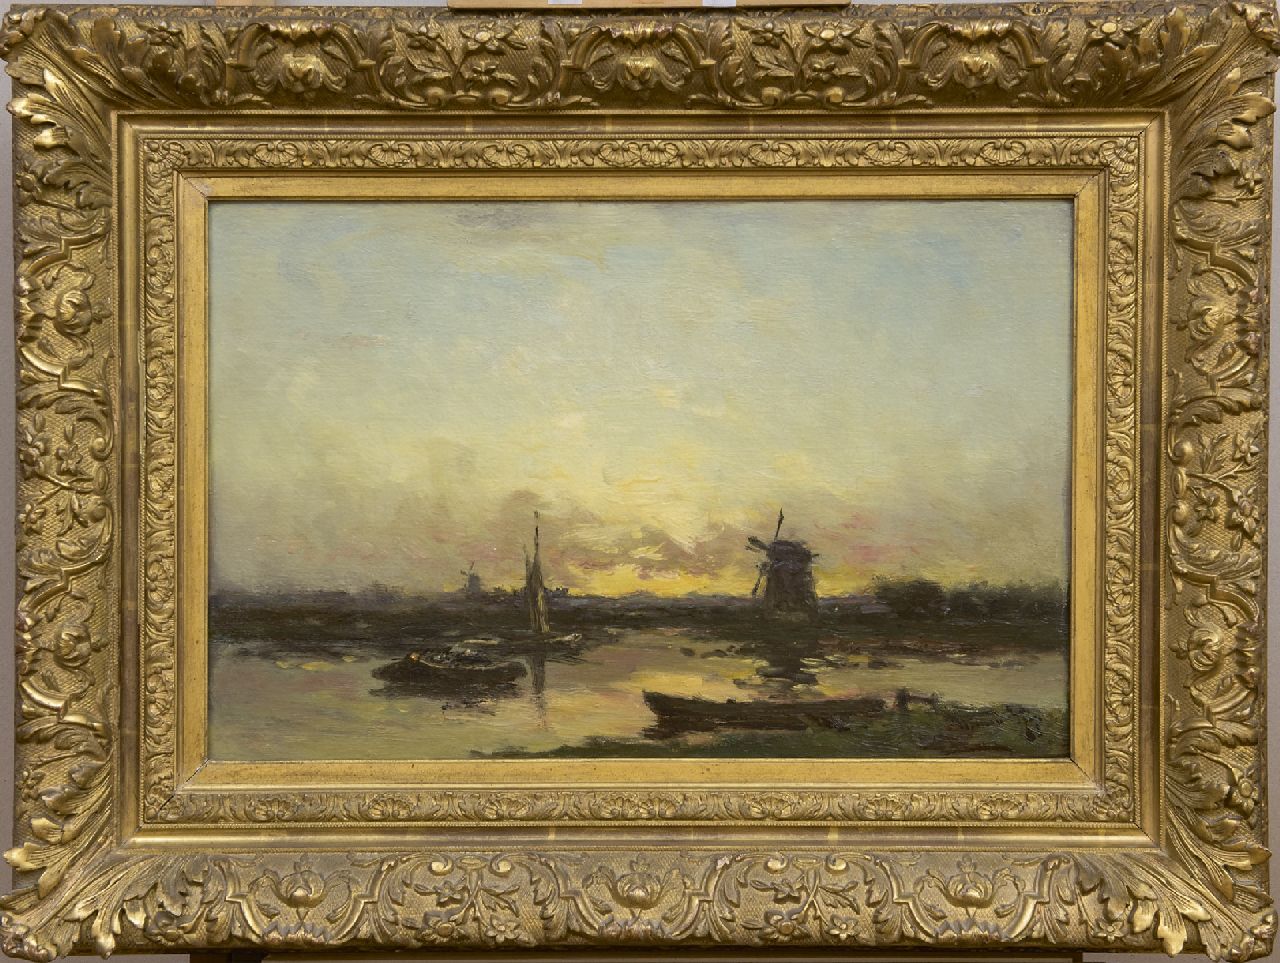 Rip W.C.  | 'Willem' Cornelis Rip | Paintings offered for sale | Windmills and barges at sunset, oil on canvas 36.9 x 55.5 cm, signed l.r.